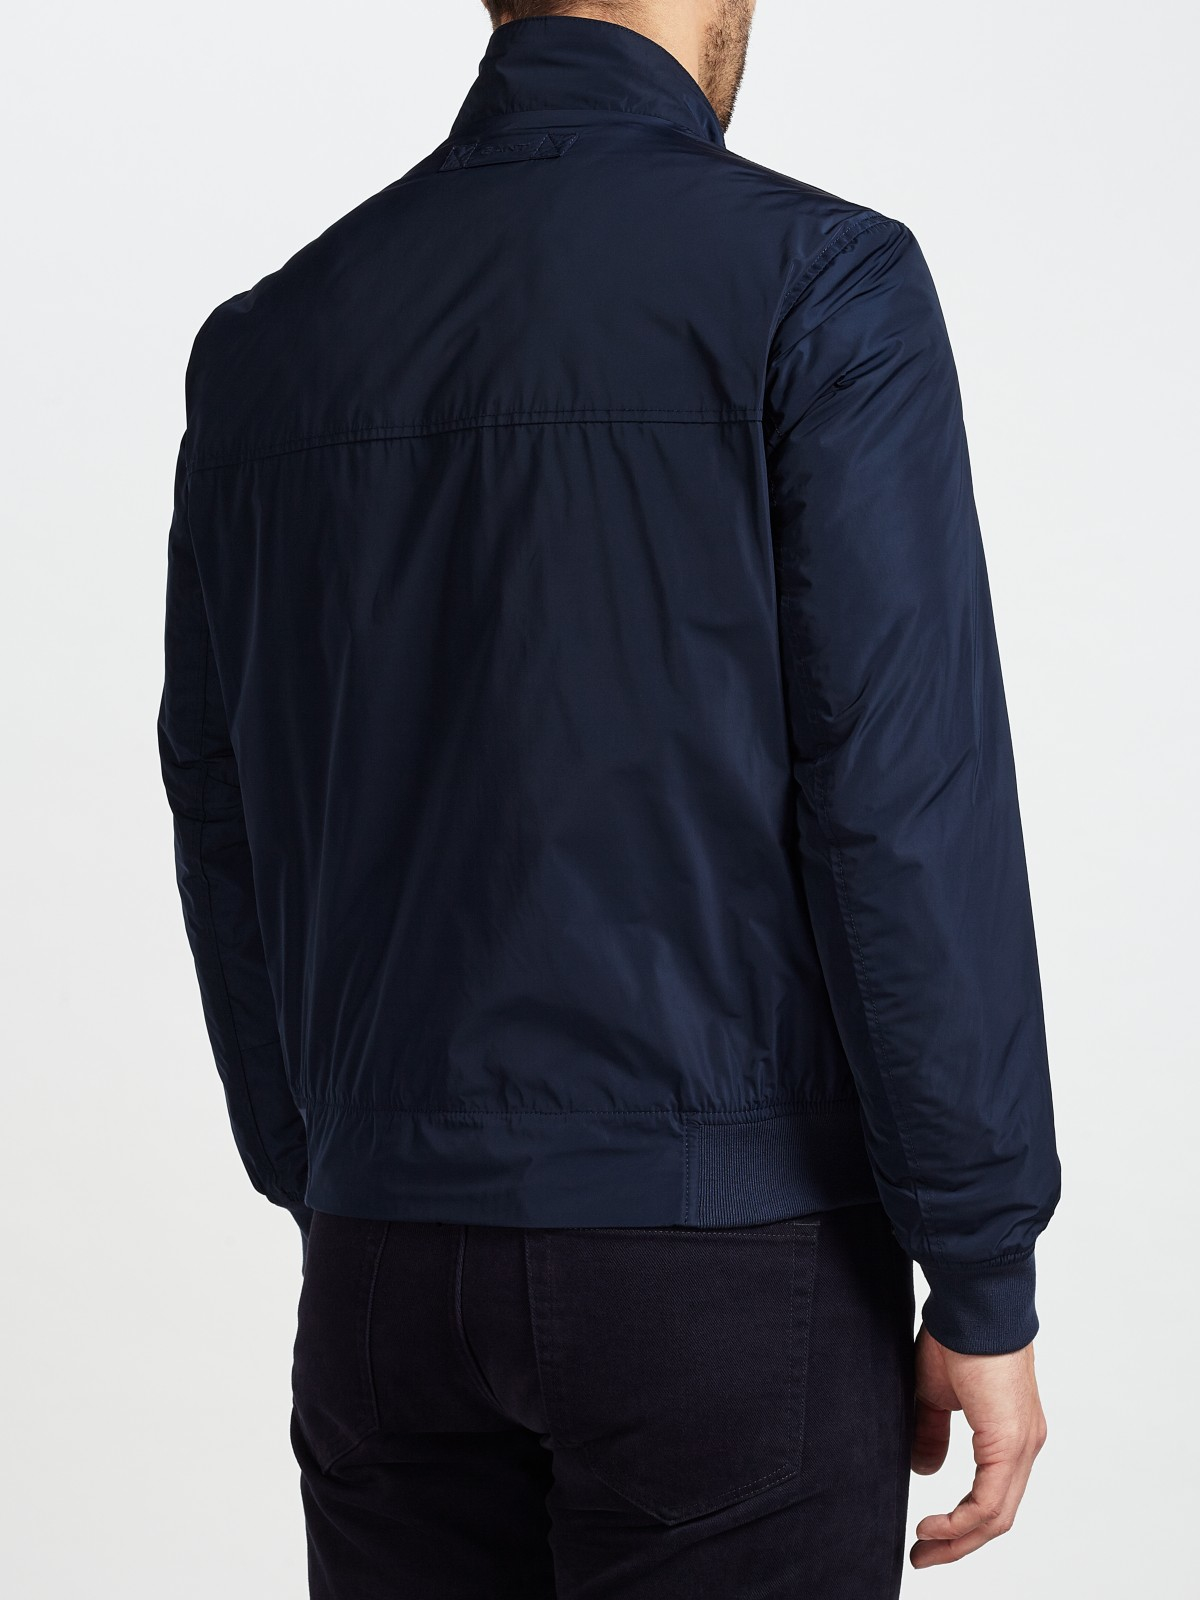 GANT Synthetic Winter Cruise Jacket for Men - Lyst